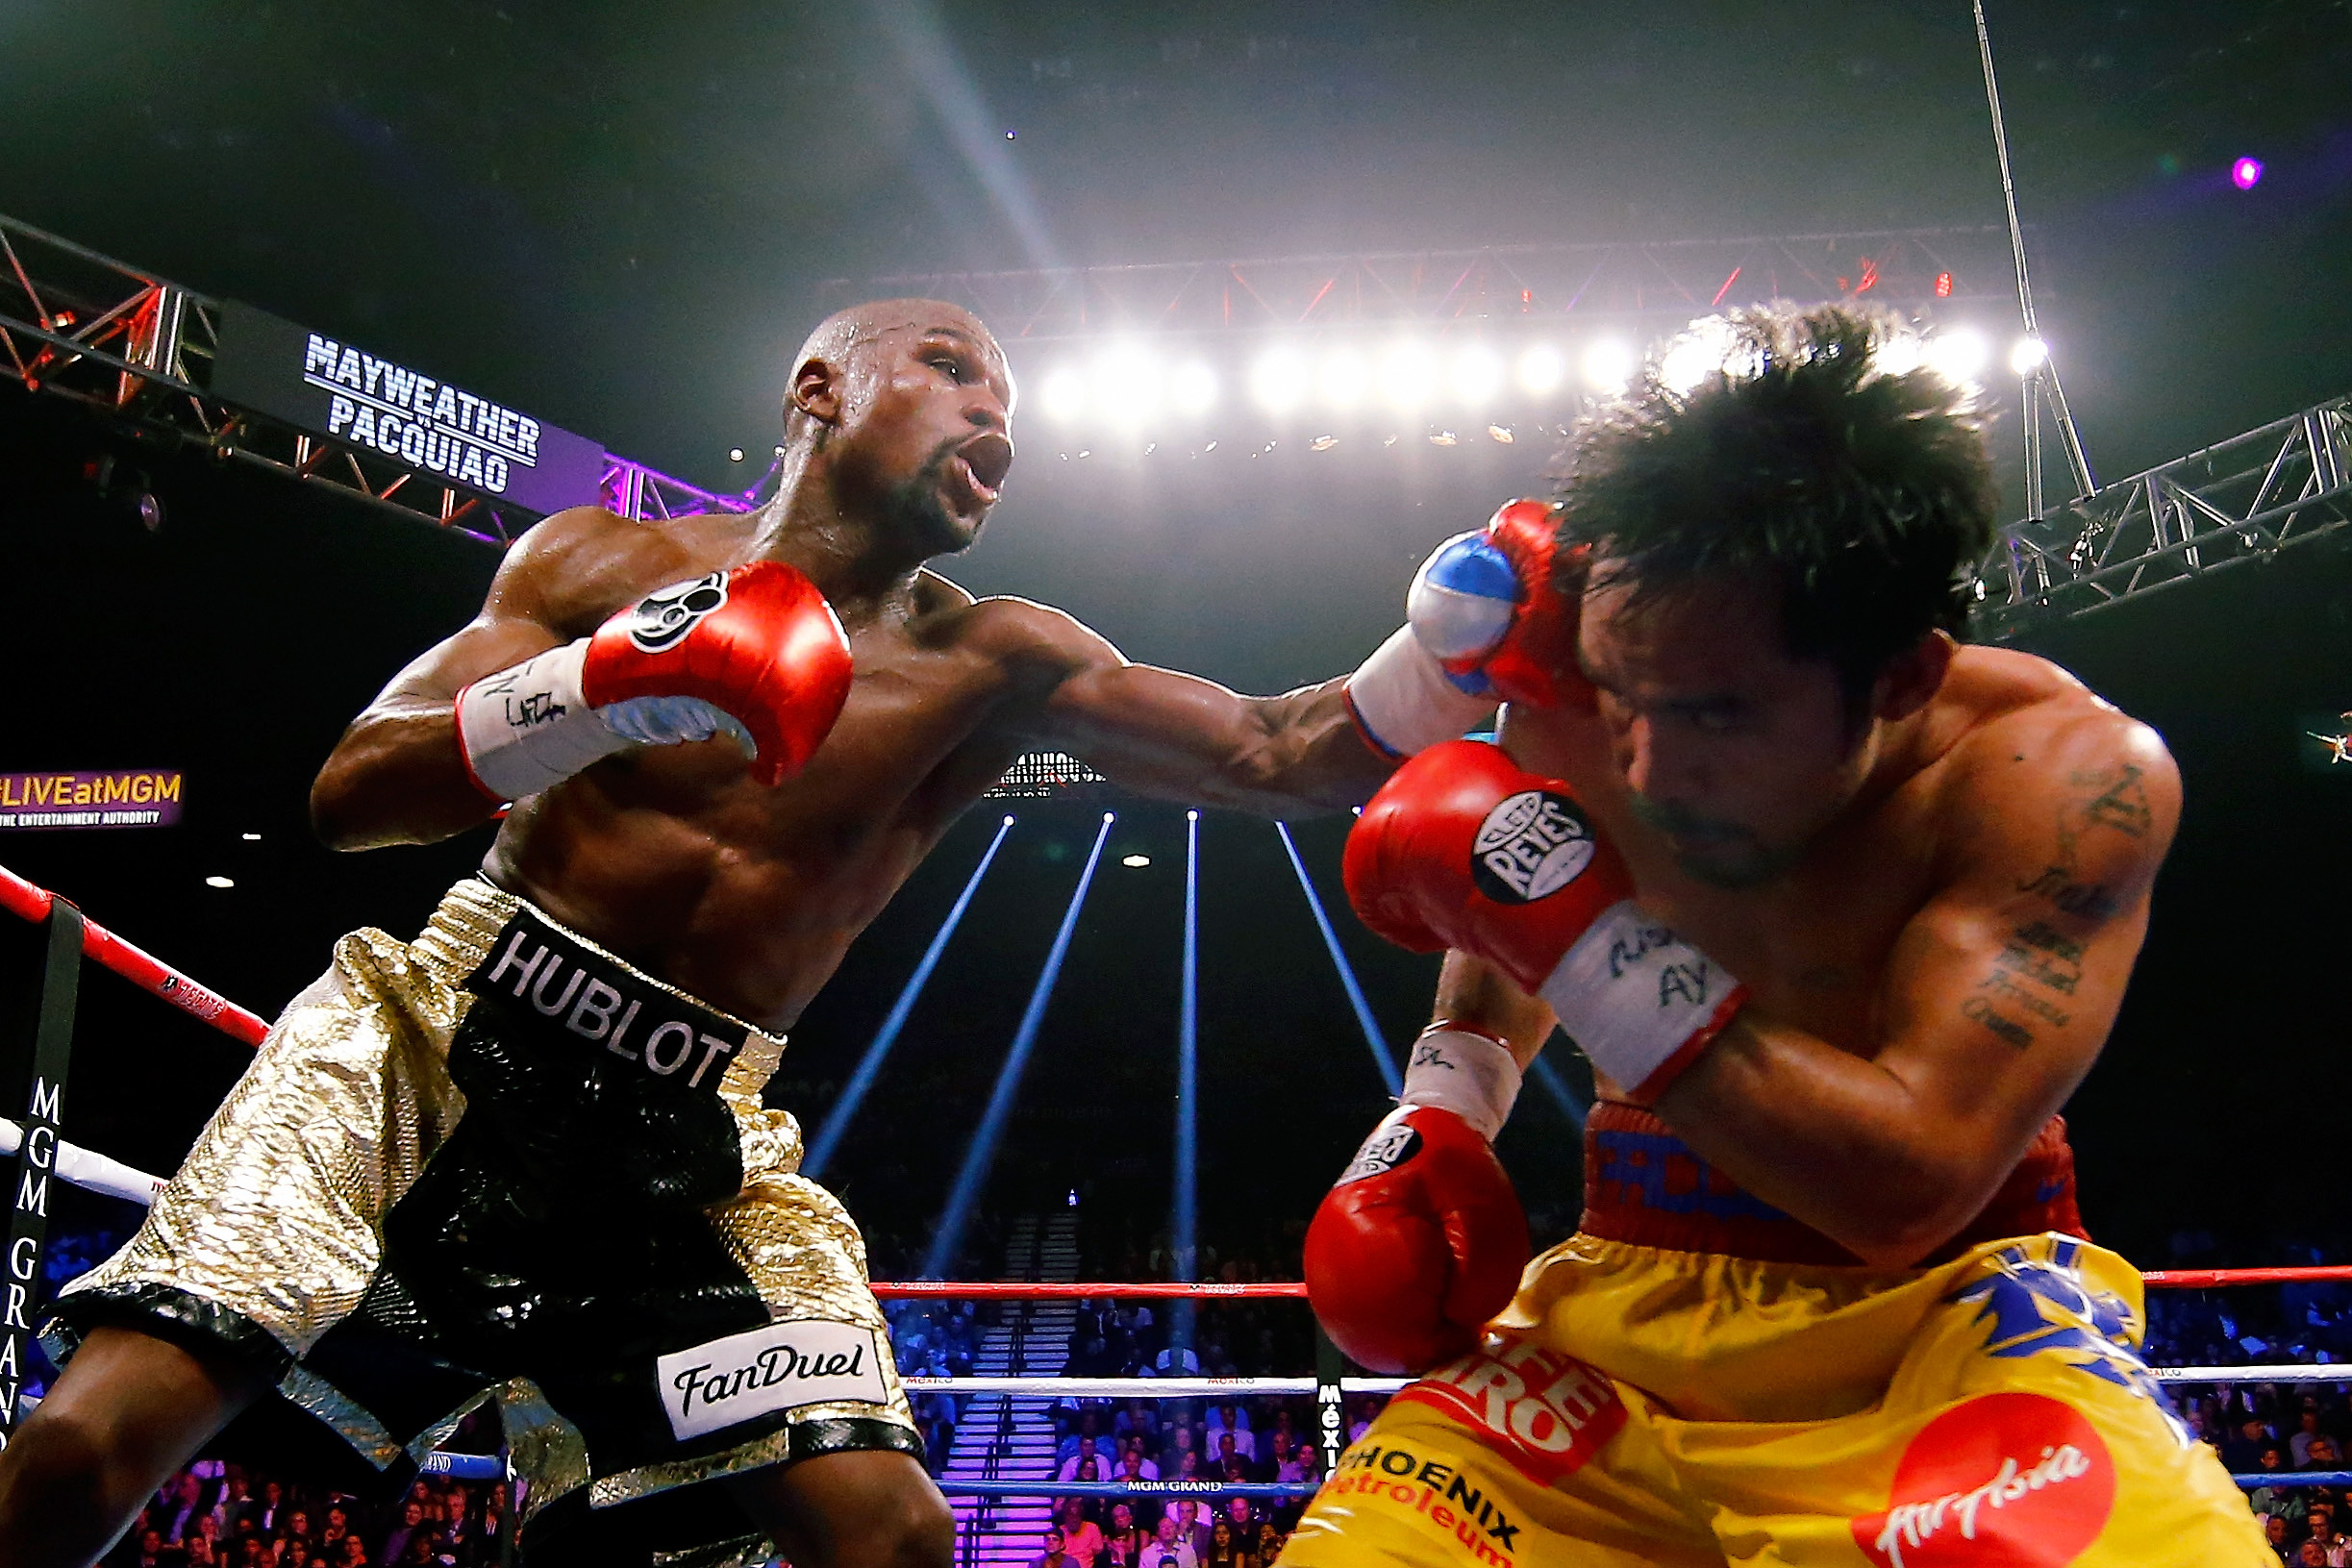 Floyd Mayweather Jr. throws a punch at Manny Pacquiao during their welterweight unification championship bout on May 2, 2015 in Las Vegas.